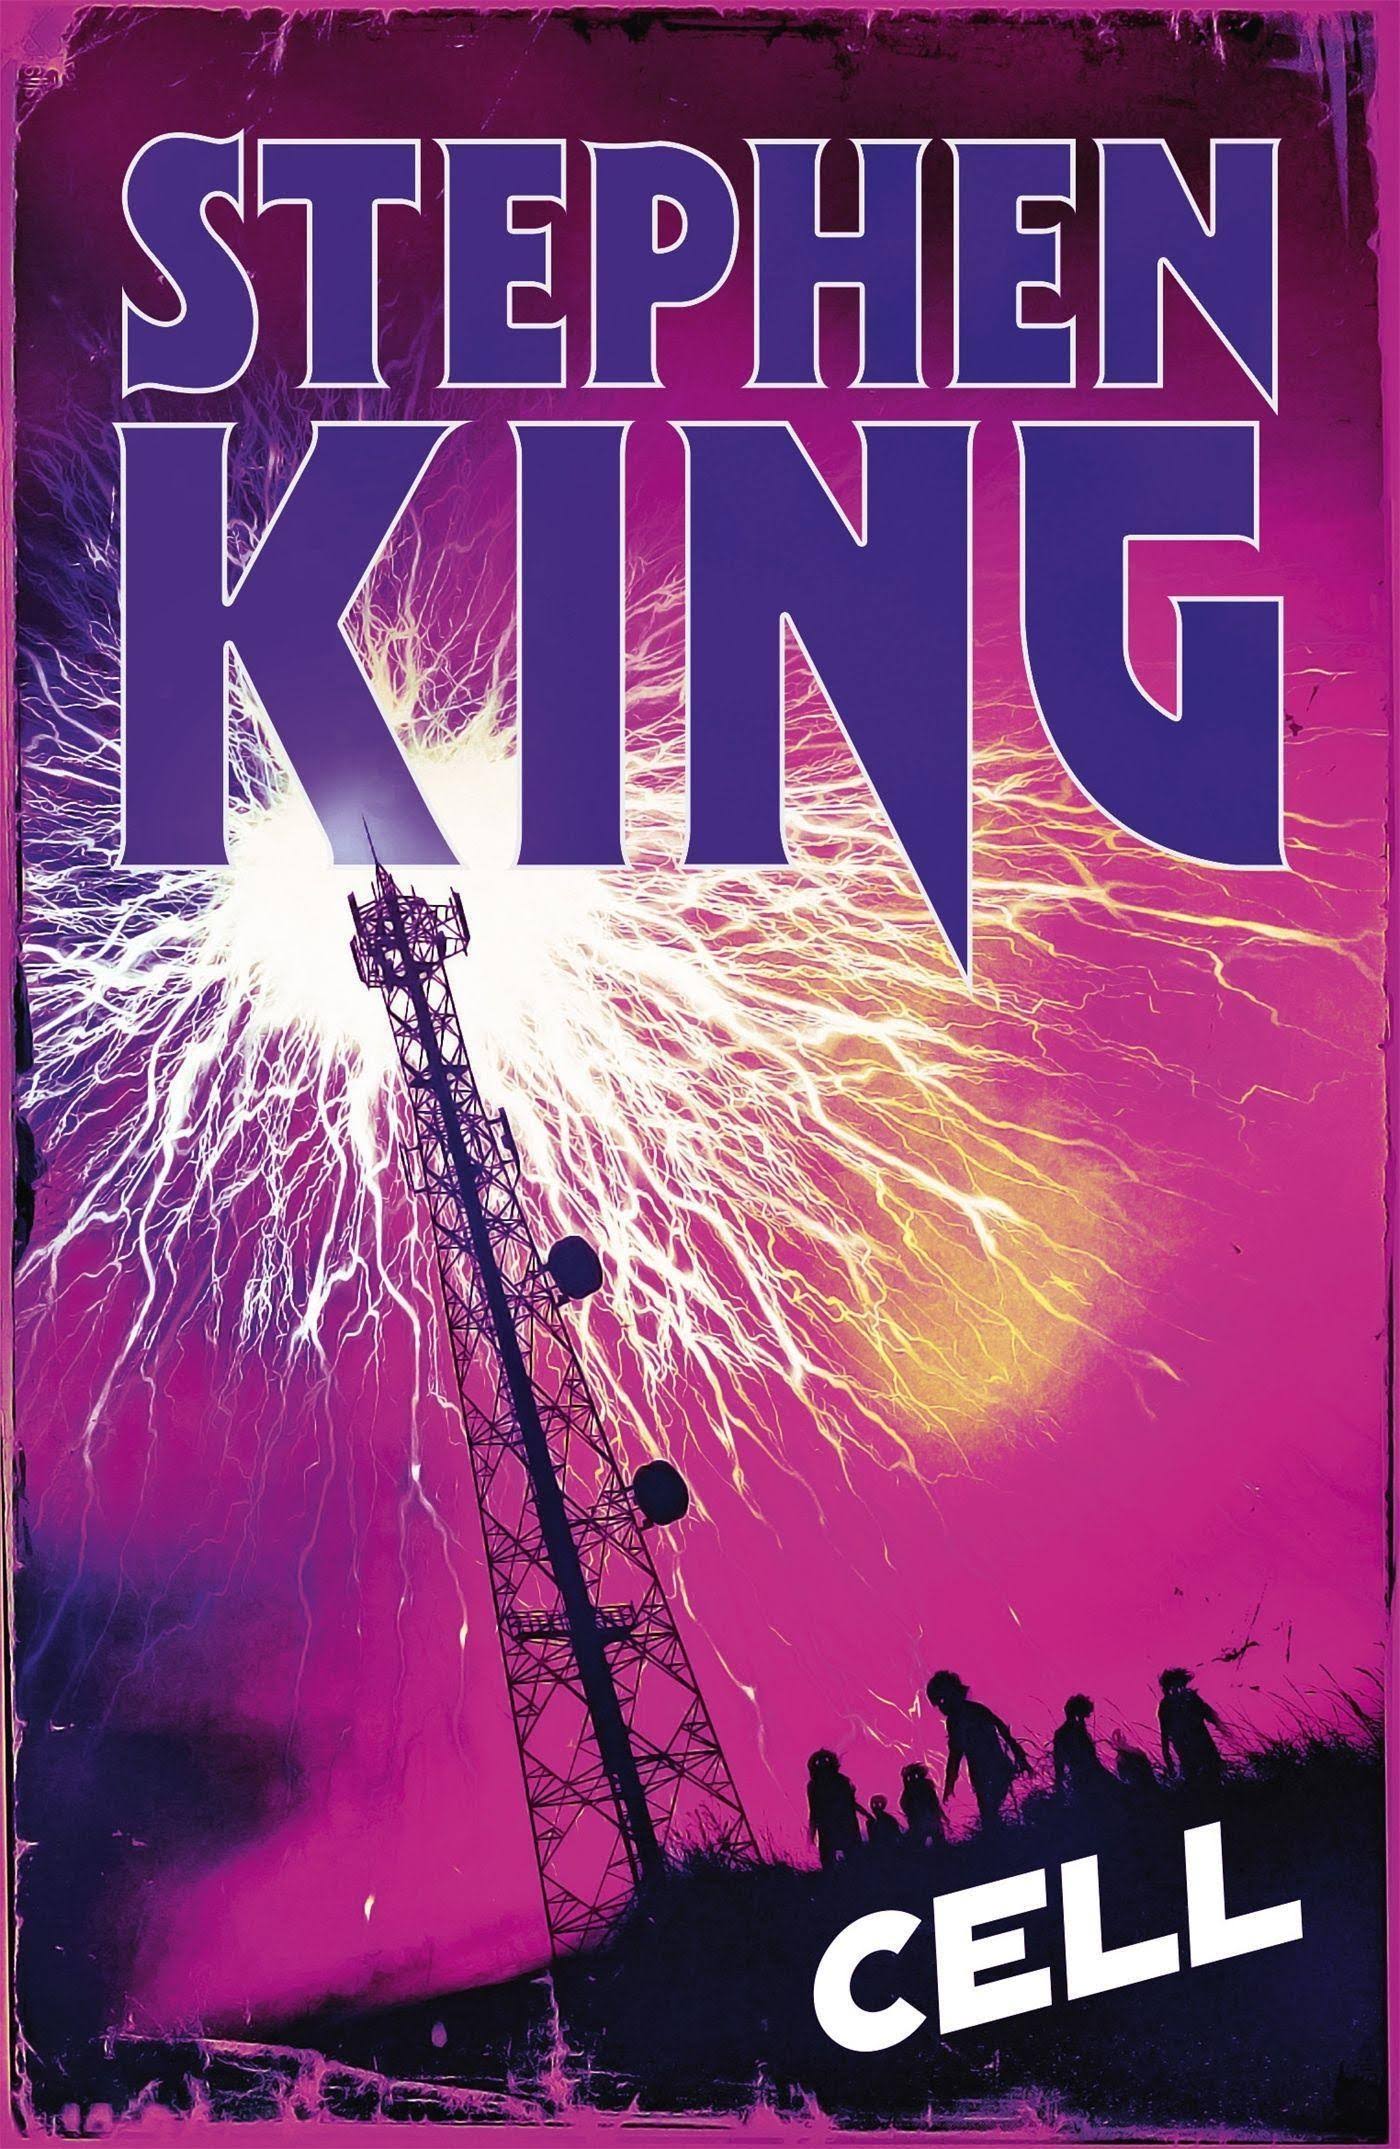 Cell By Stephen King